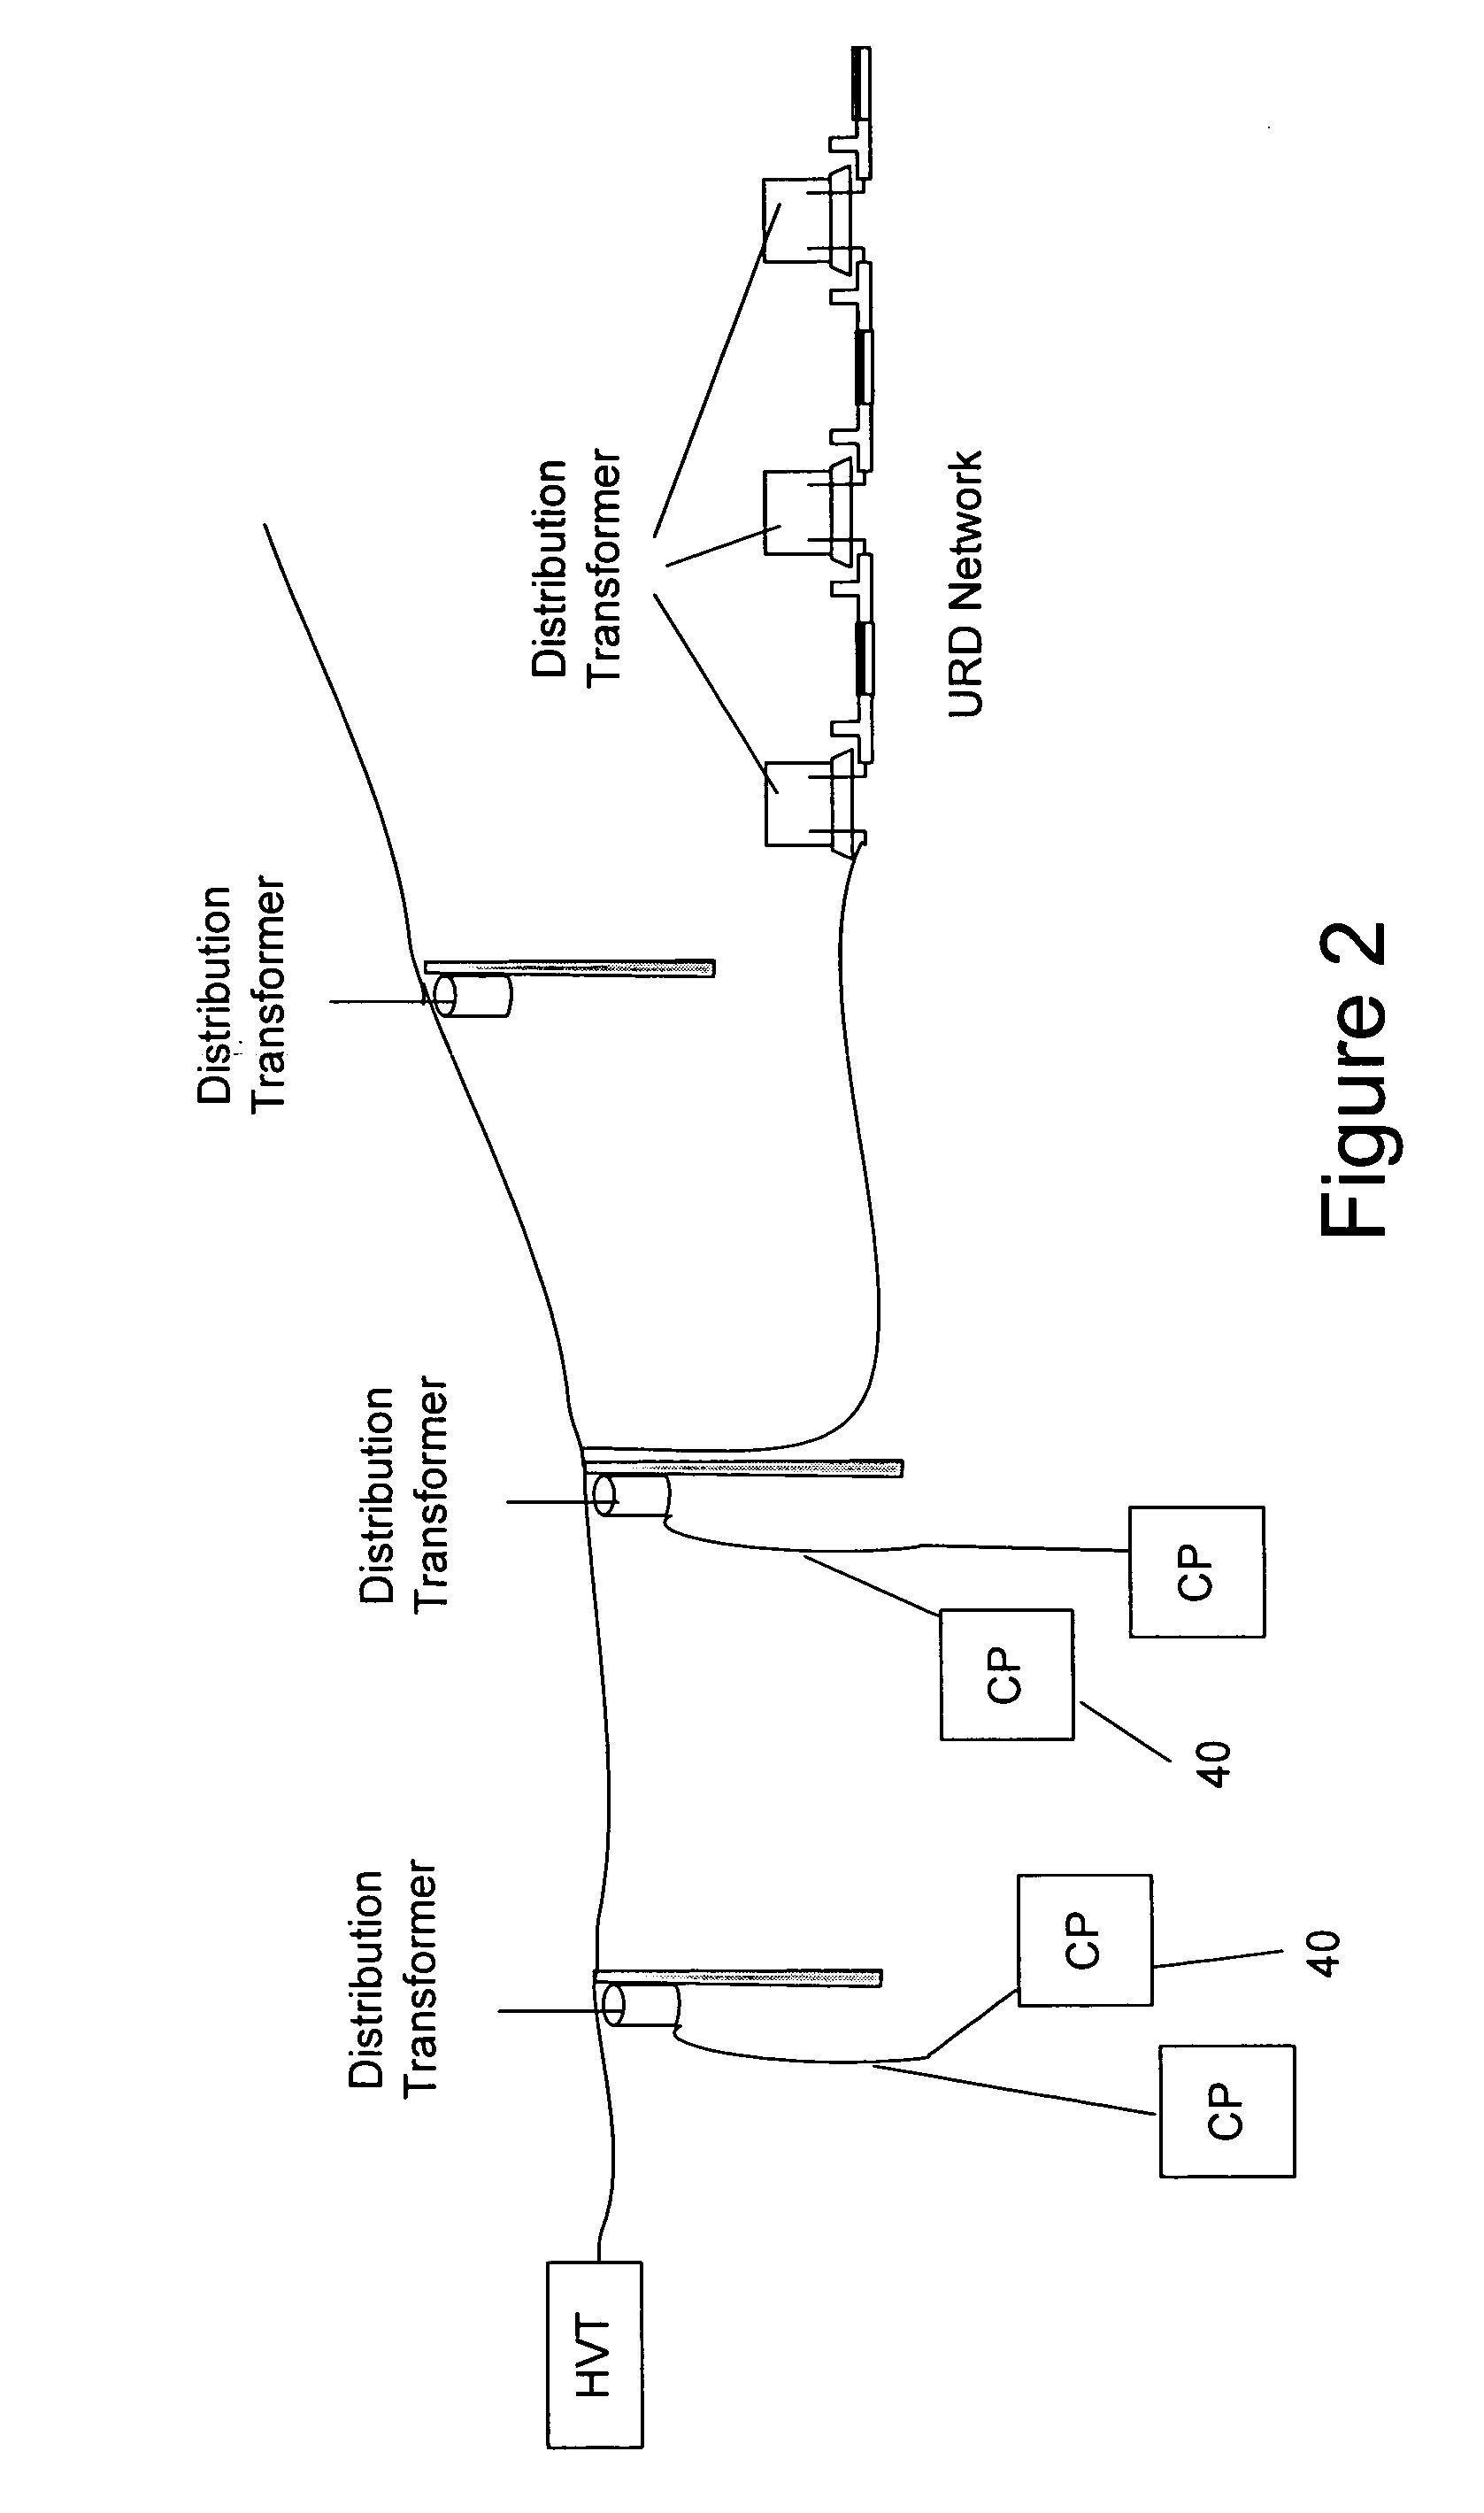 Power line communications system and method of operating the same